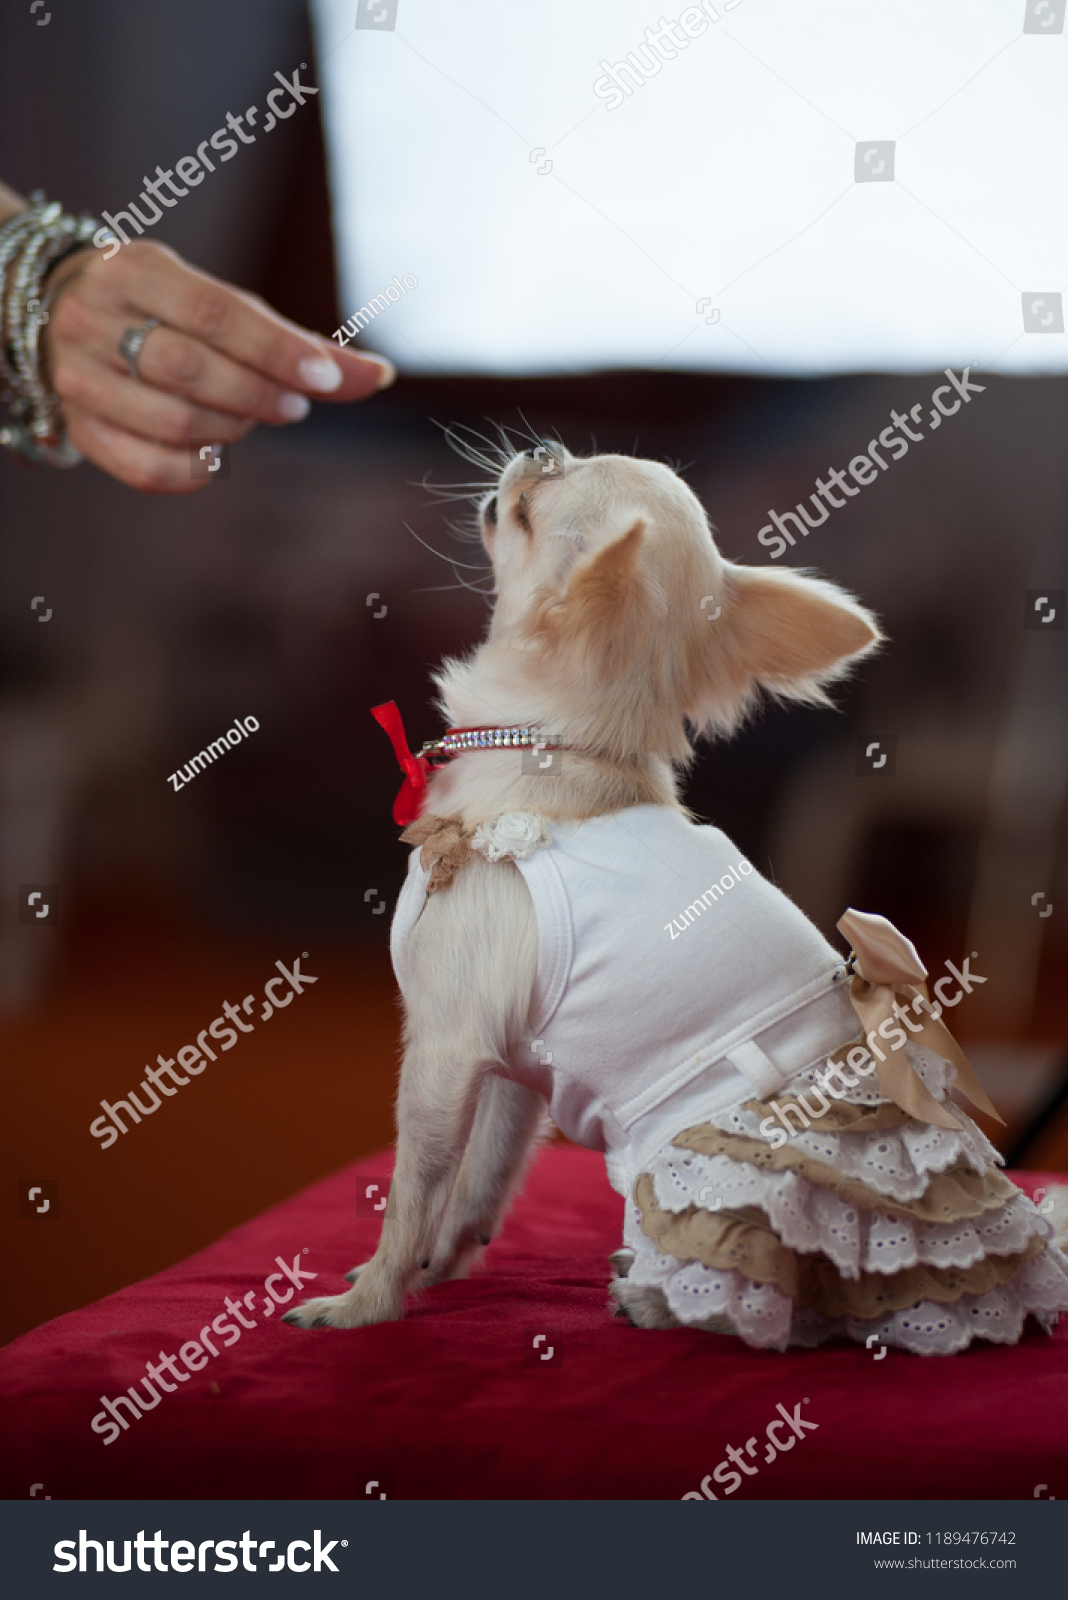 Dog wearing haute couture suit, luxury collar with red ribbon, during a photo shooting.
 #1189476742